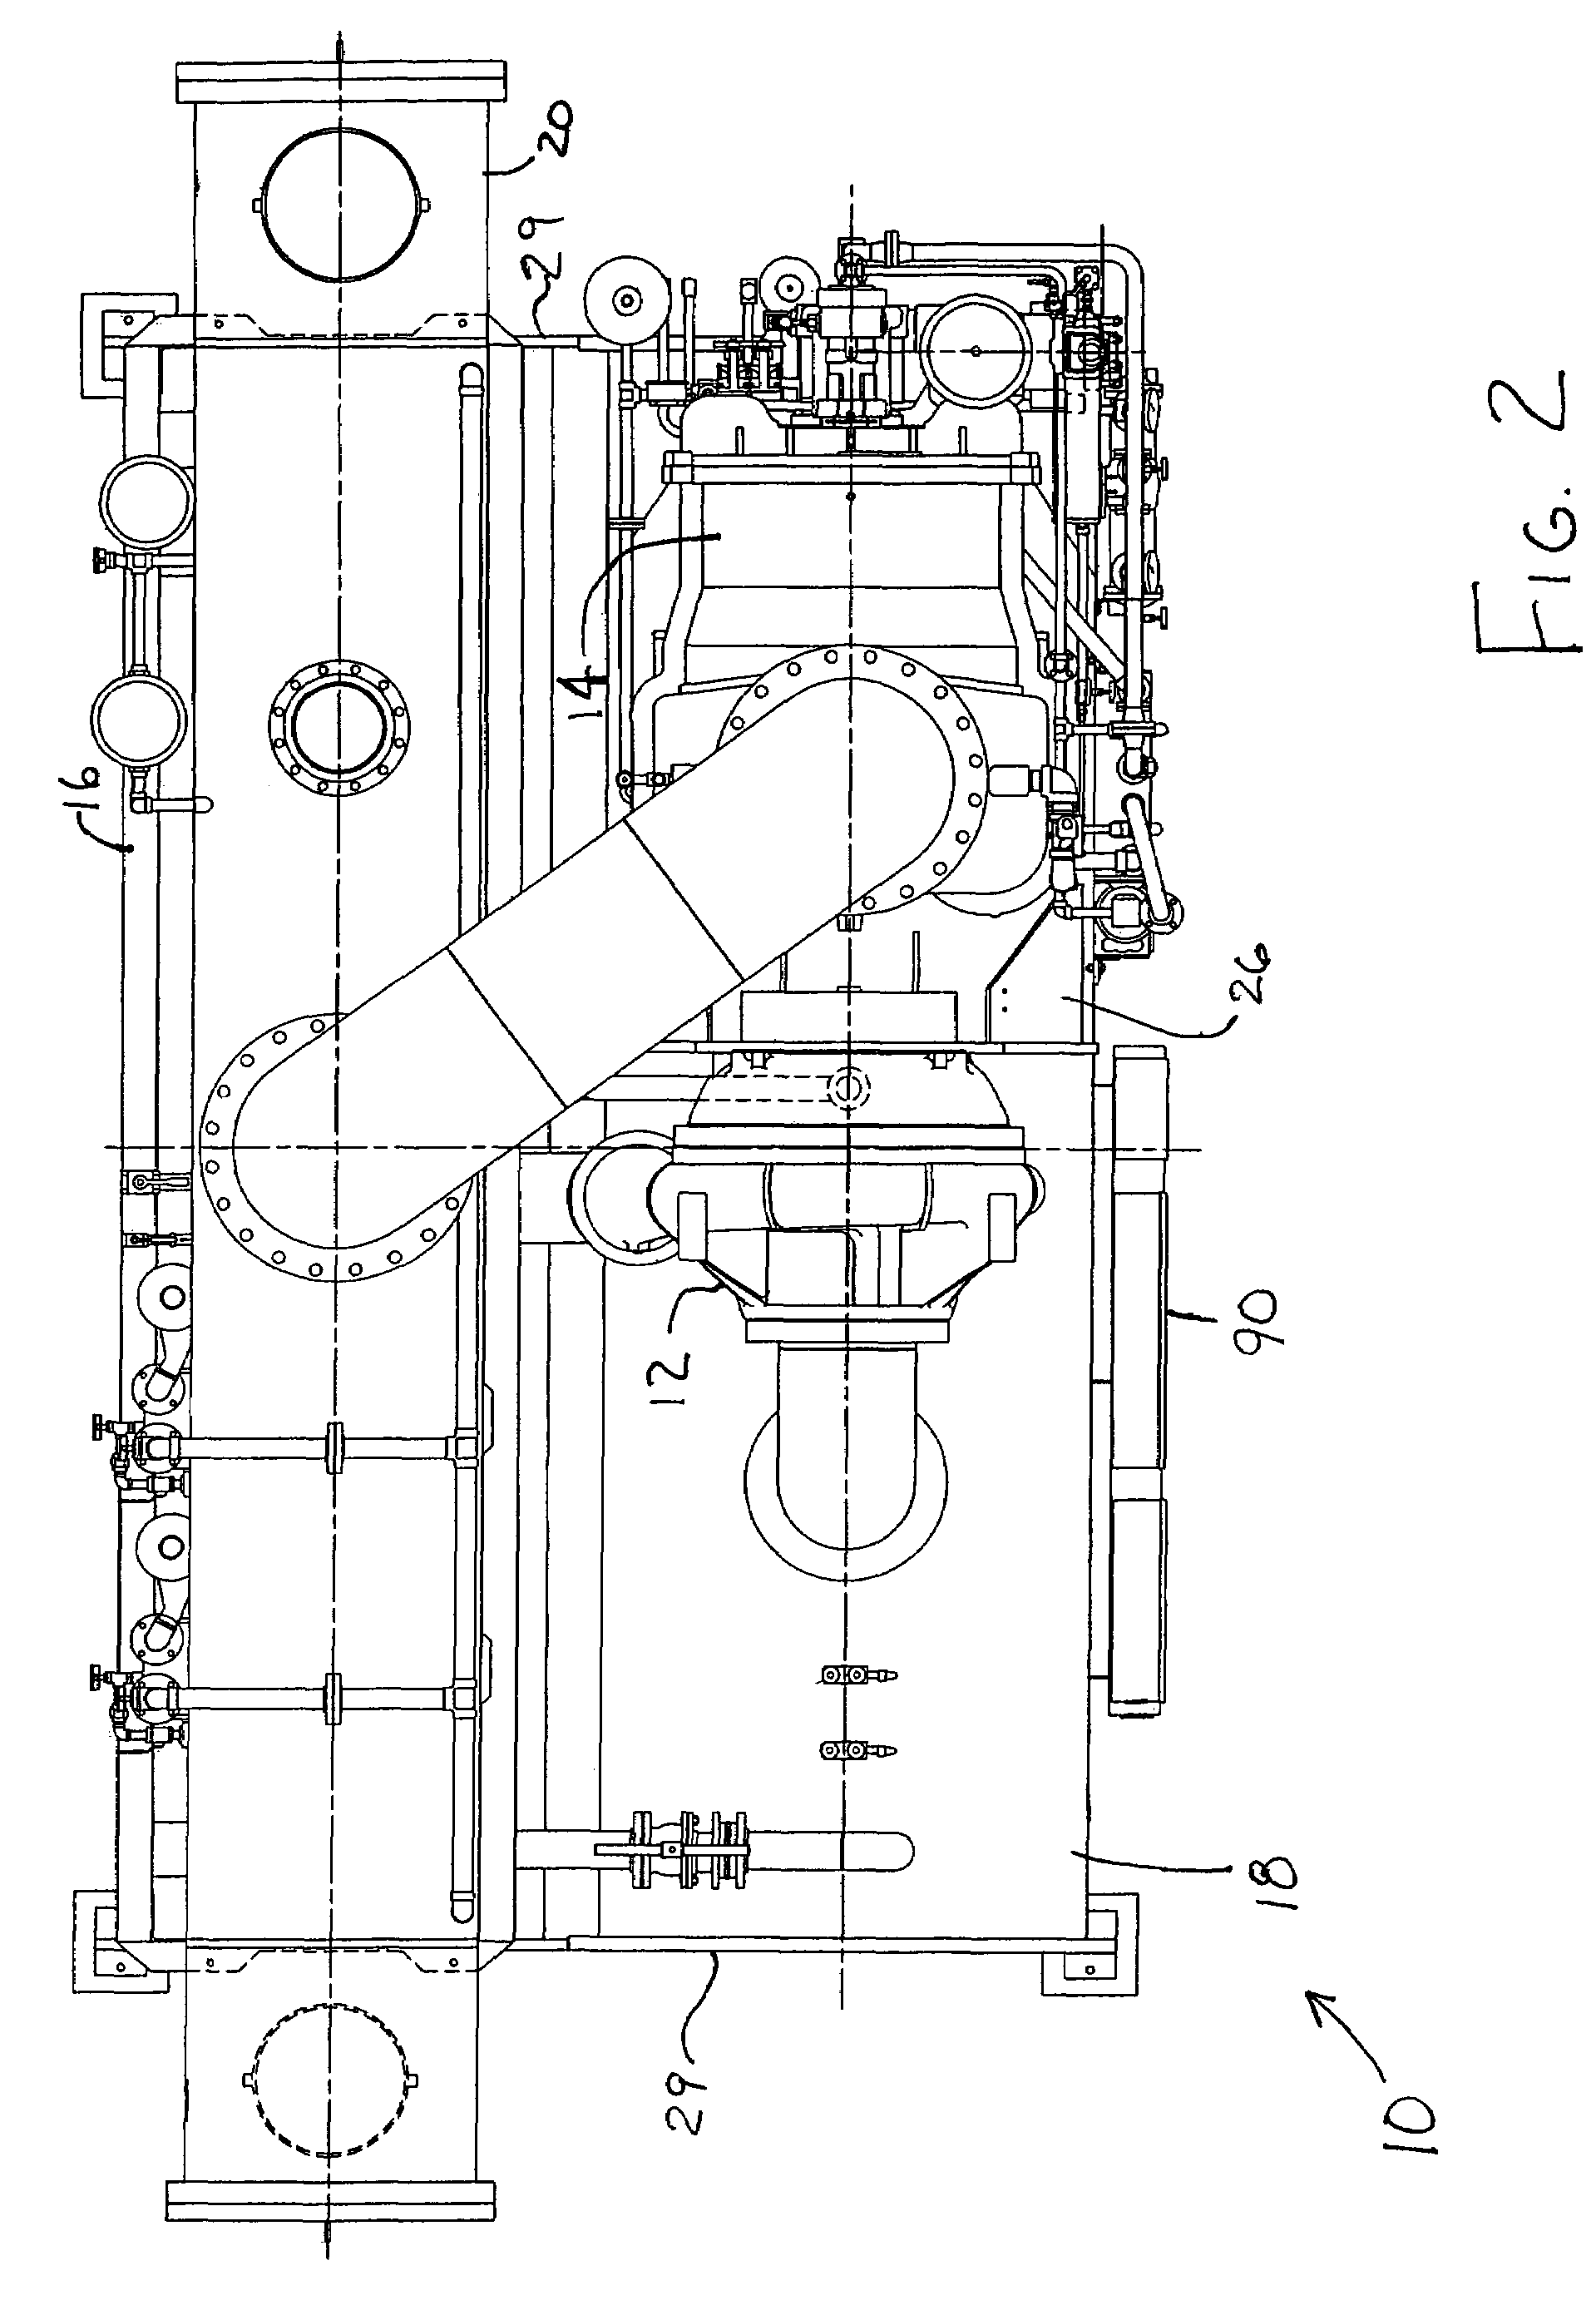 Enhanced manual start/stop sequencing controls for a steam turbine powered chiller unit